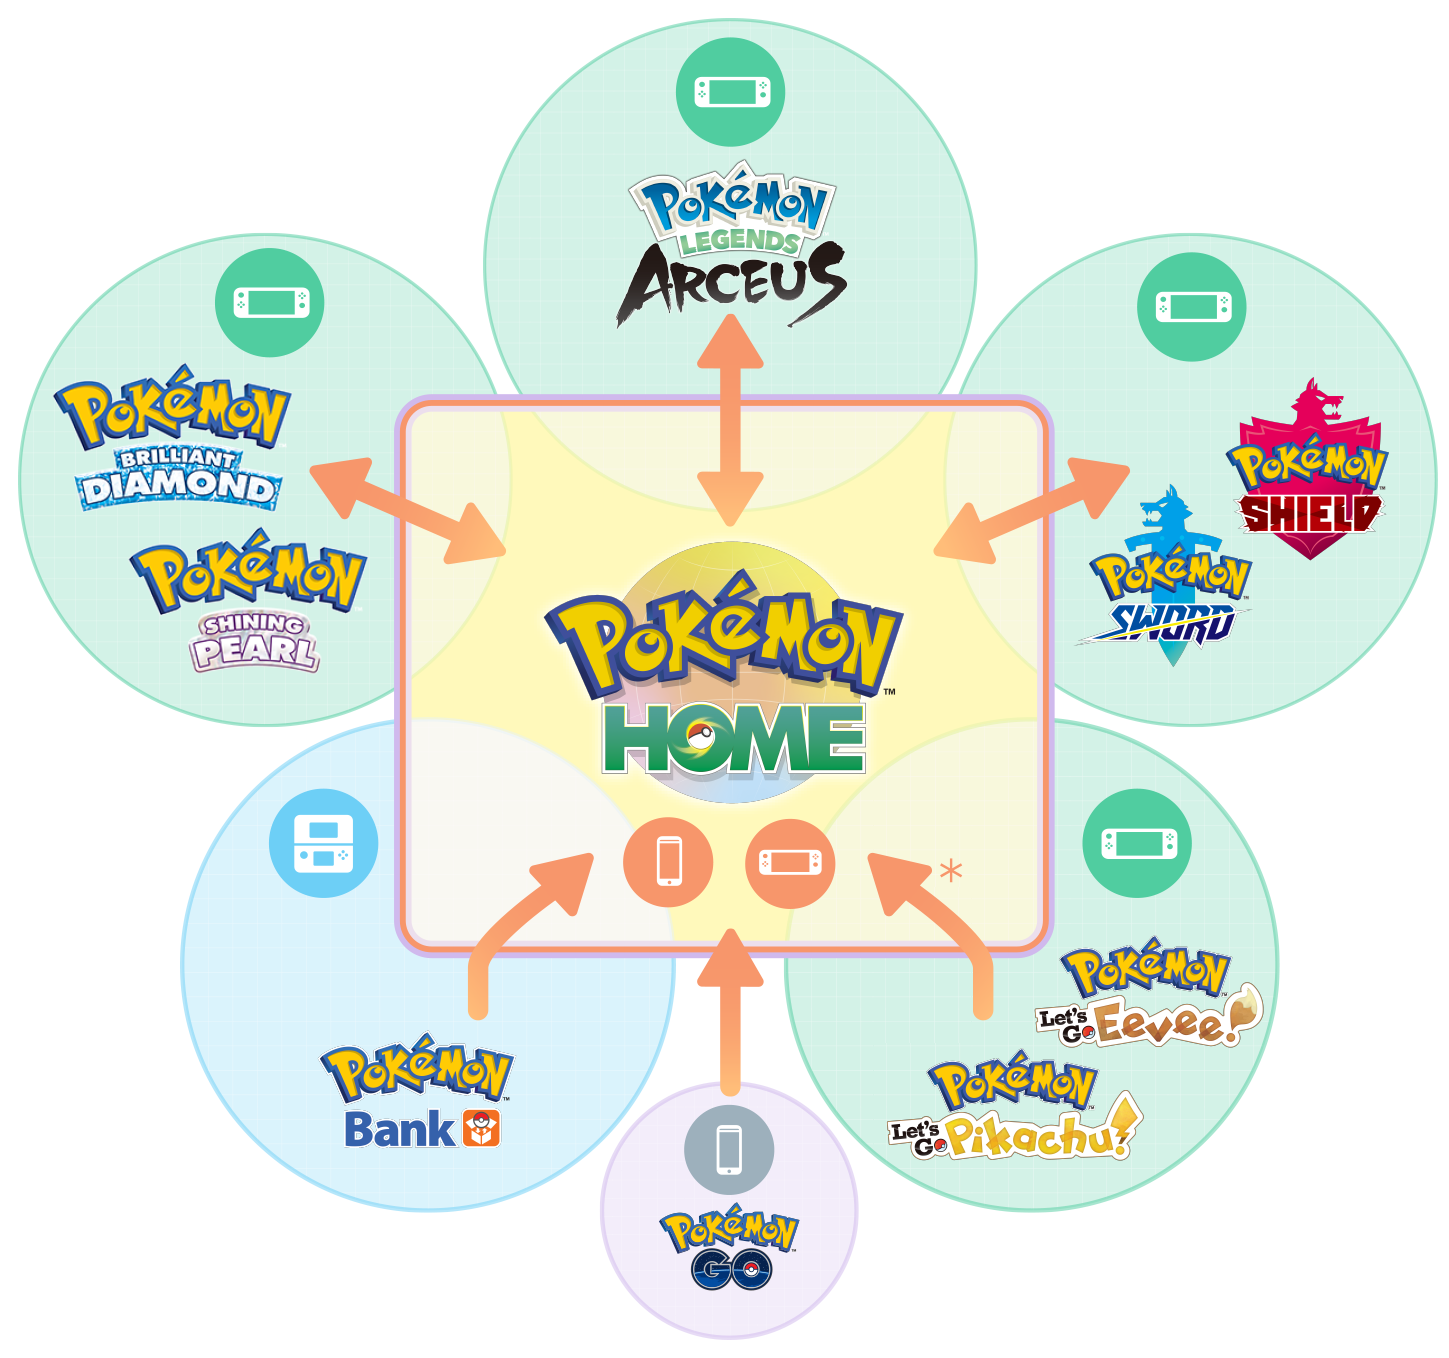 Pokemon_Home_Infographic.png